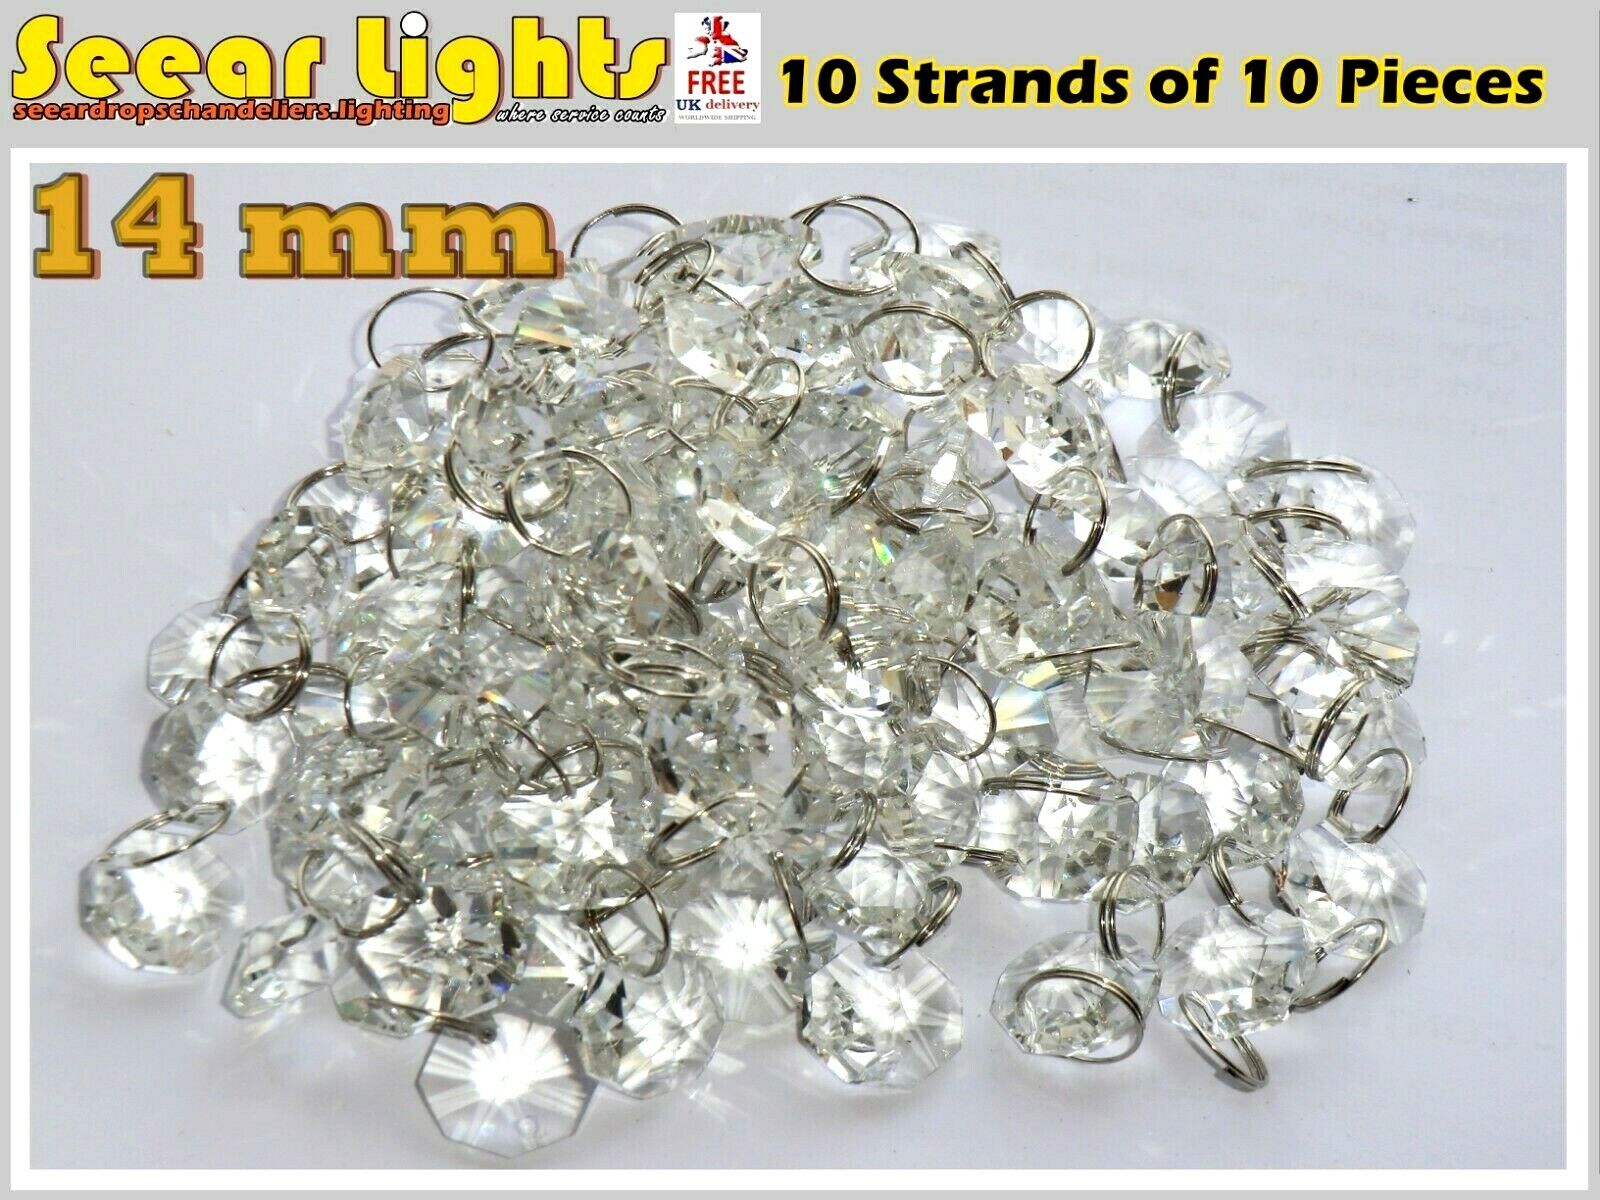 100 Chandelier Light Crystals 2m Garland 14mm Cut Glass Drops Beads Droplets